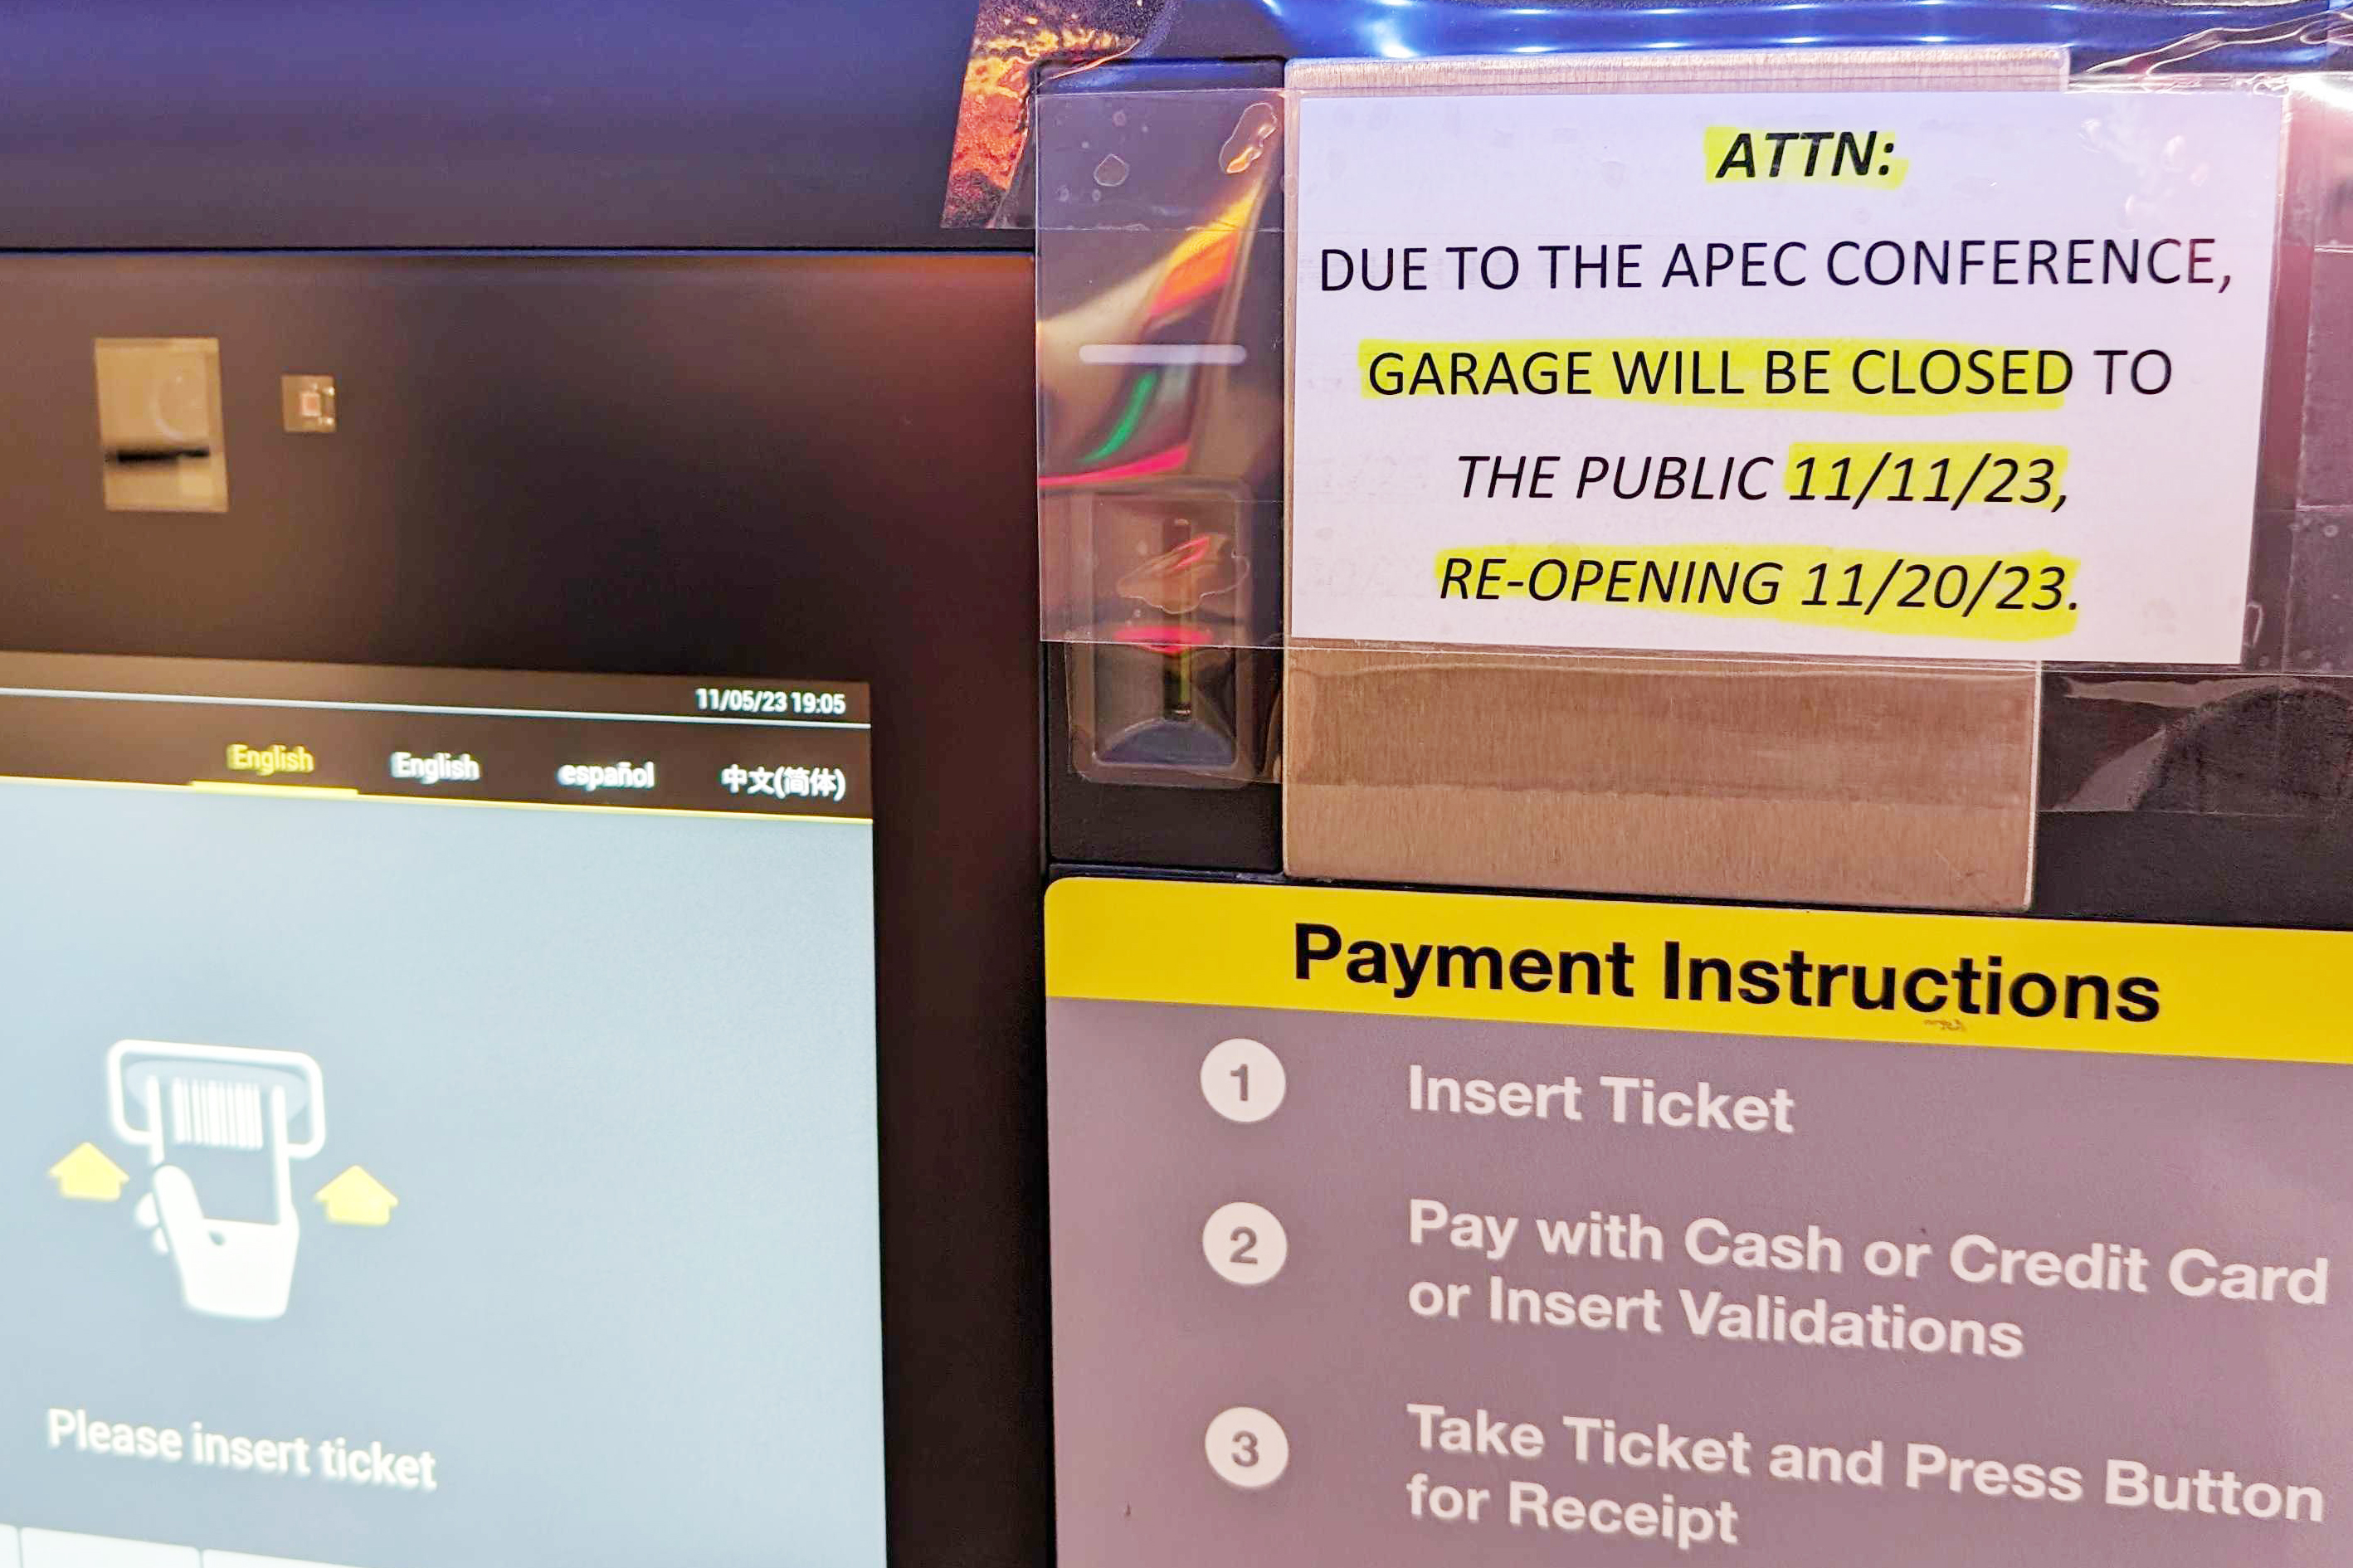 A sign is taped to a parking garage payment machine that reads &quot;ATTN: DUE TO THE APEC CONFERENCE, GARAGE WILL BE CLOSED TO THE PUBLIC 11/11/22, RE-OPENING 11/20/23.&quot; More text on the machine reads &quot;Payment Instructions&quot;, &quot;Insert Ticket&quot;, &quot;Please insert ticket&quot; among other general phrases for paying for parking.